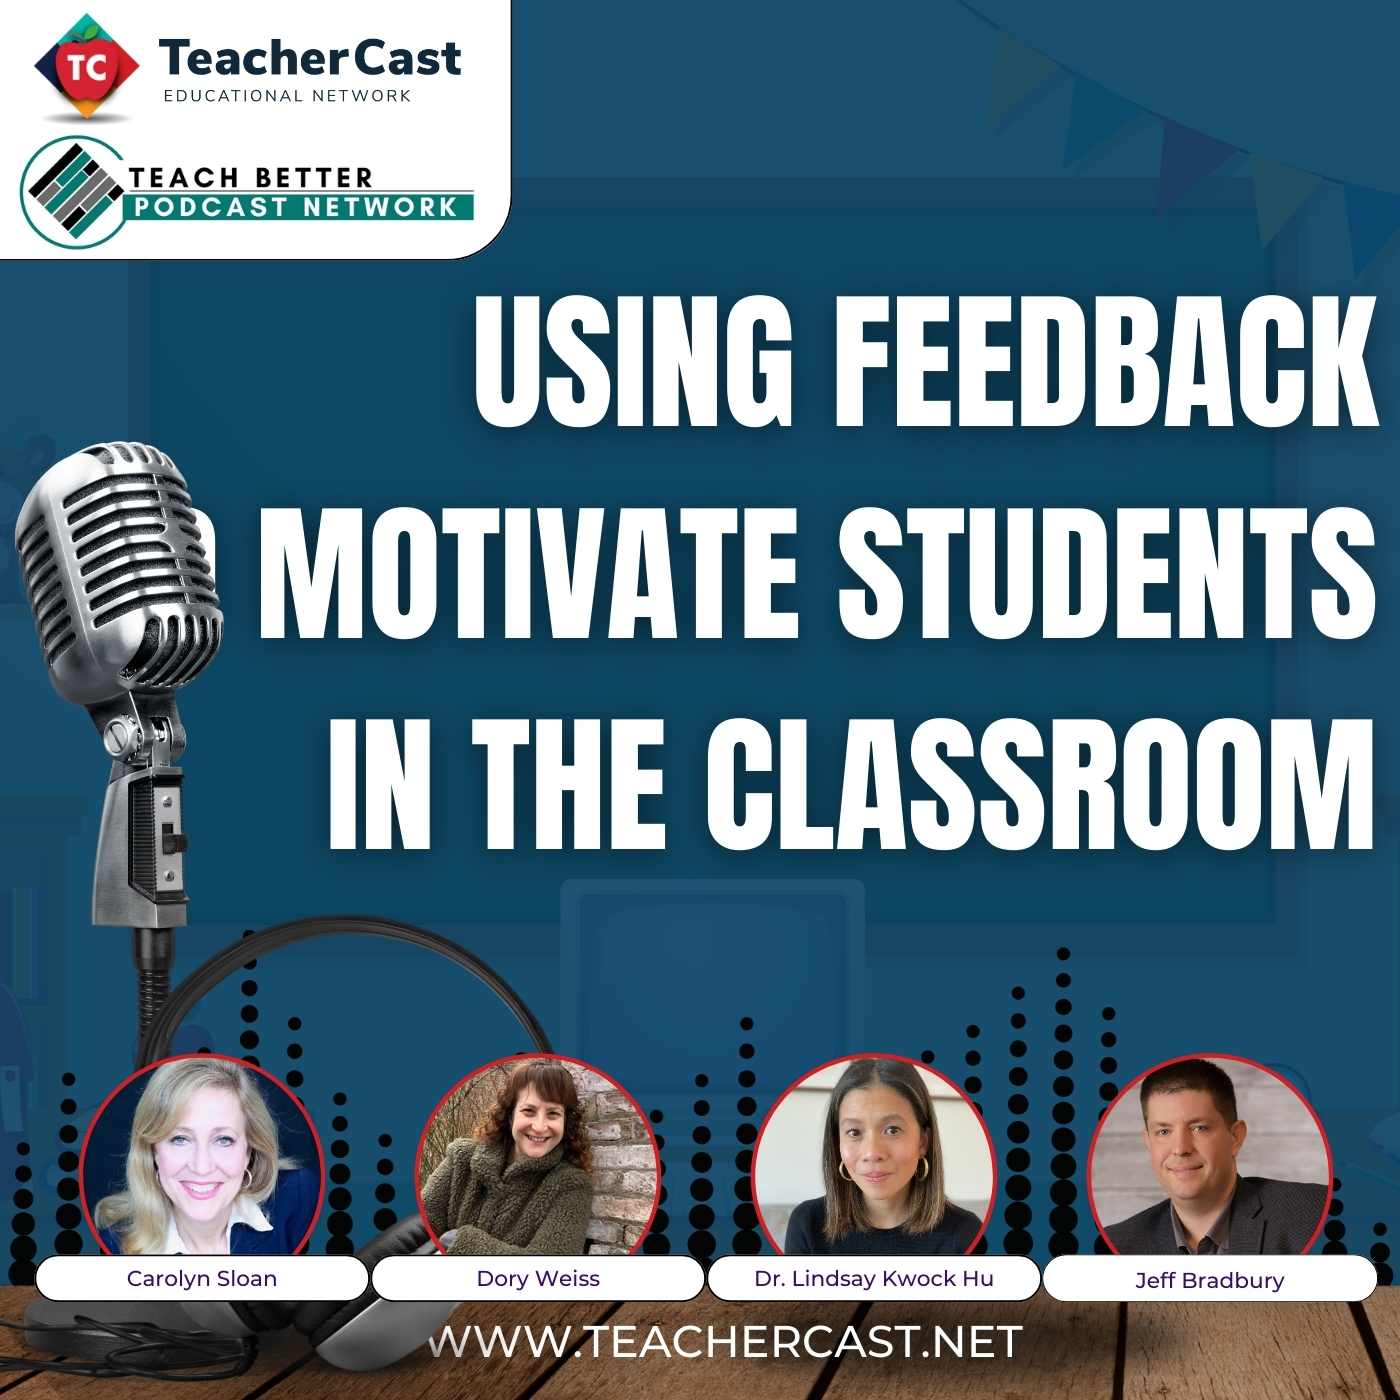 How Can We Support Student Innovation Through Authentic and Meaningful Feedback?